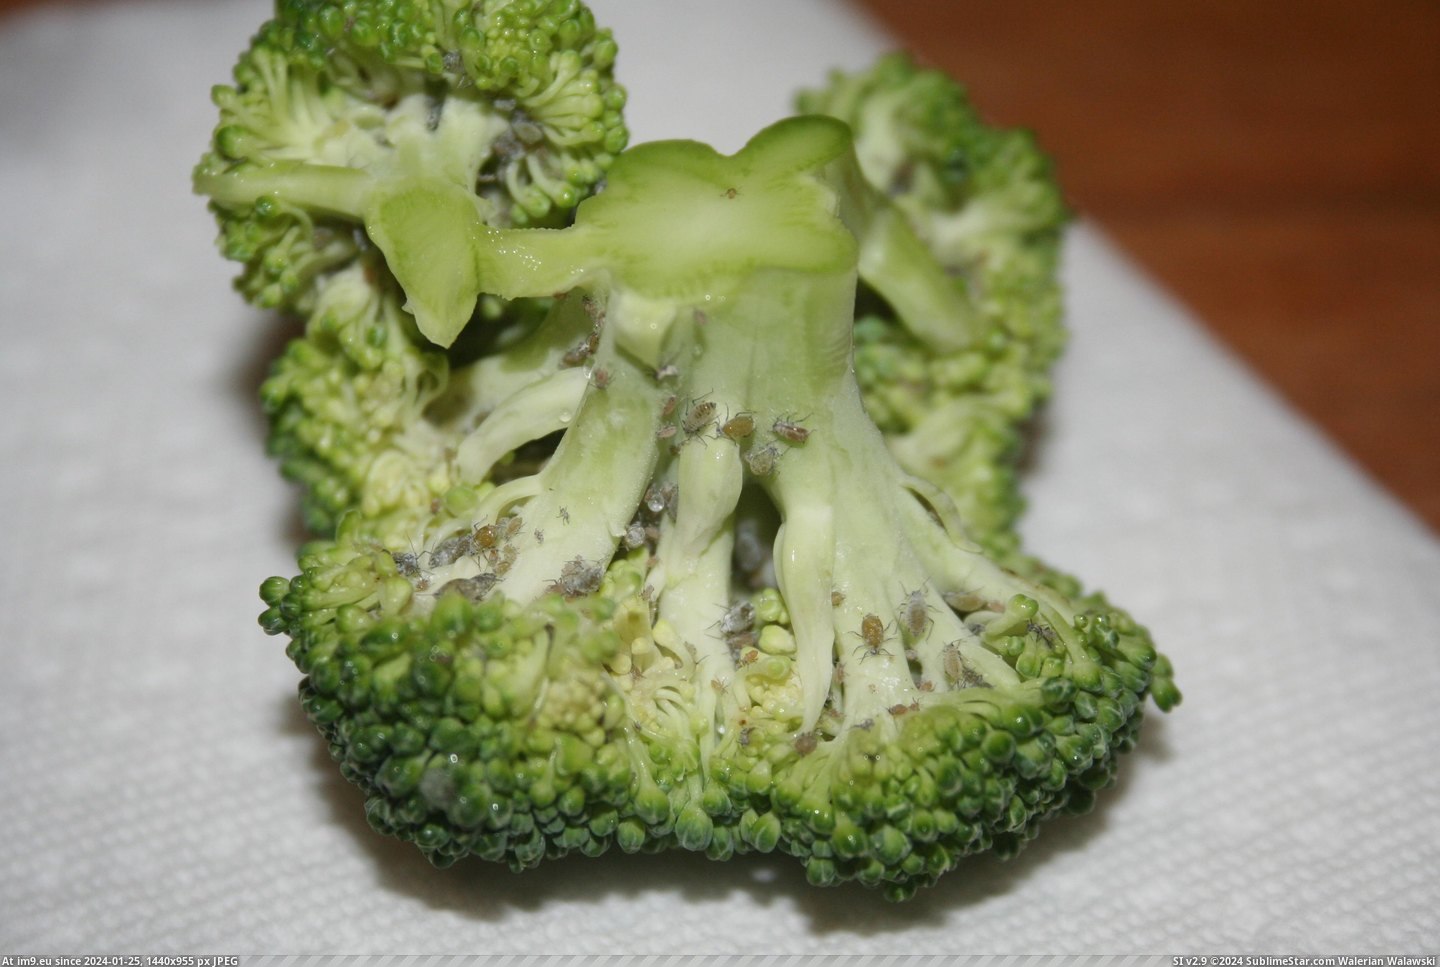 #Wtf #Extra #Protein #Chopping #Veggies #Closer #Ate [Wtf] Look closer when chopping veggies. I almost ate this. I don't want the extra protein, thanks. Pic. (Image of album My r/WTF favs))